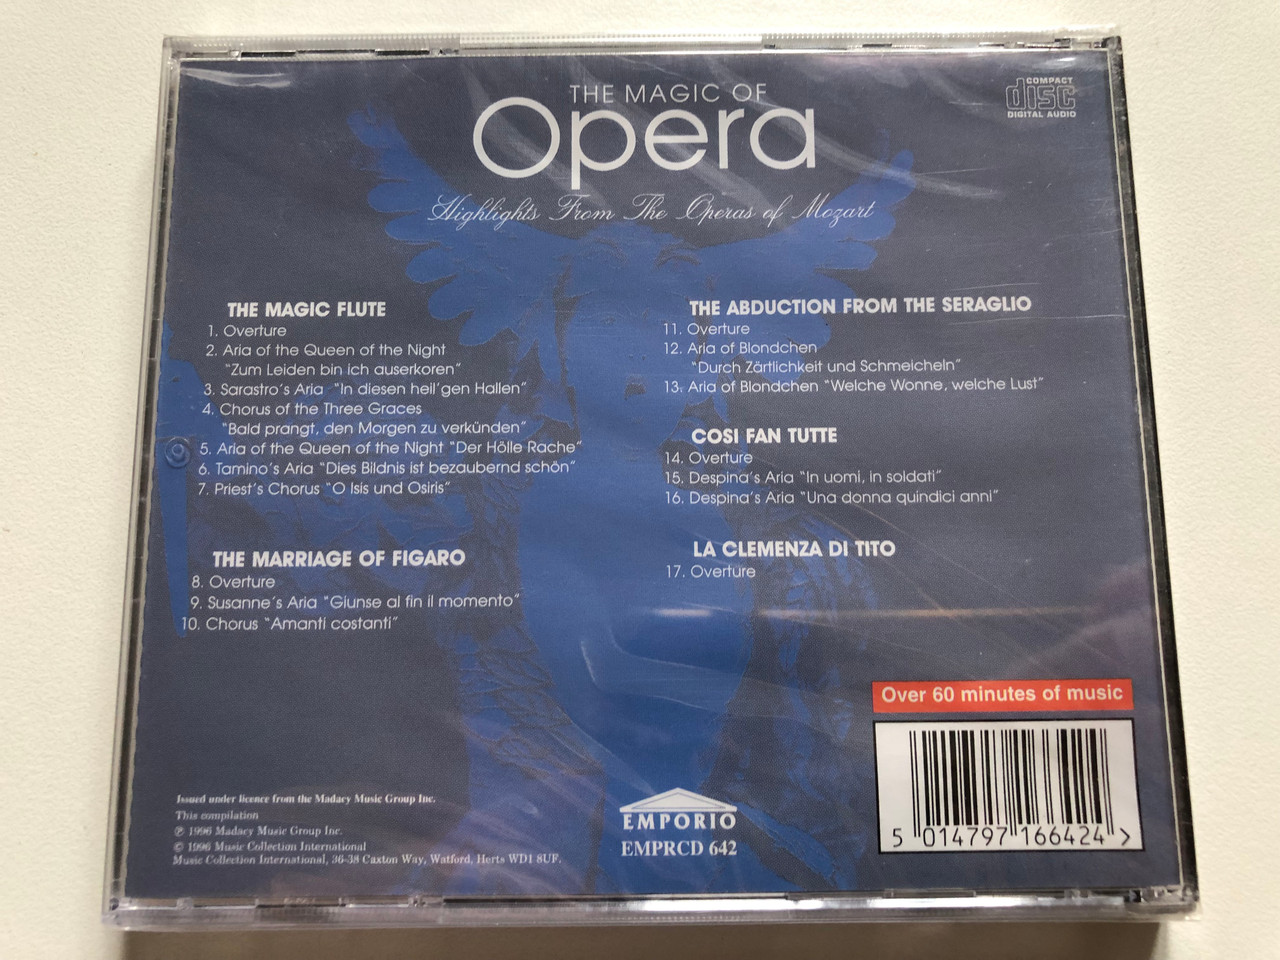 https://cdn10.bigcommerce.com/s-62bdpkt7pb/products/0/images/306116/The_Magic_Of_Opera_Over_One_Hour_Of_Music_From_The_Operas_Of_Mozart_-_Featuring_highlights_from_The_Magic_Flute_The_Marriage_Of_Figaro_The_Abduction_From_The_Seraglio_Cosi_Fan_Tutte_L__89010.1698155505.1280.1280.JPG?c=2